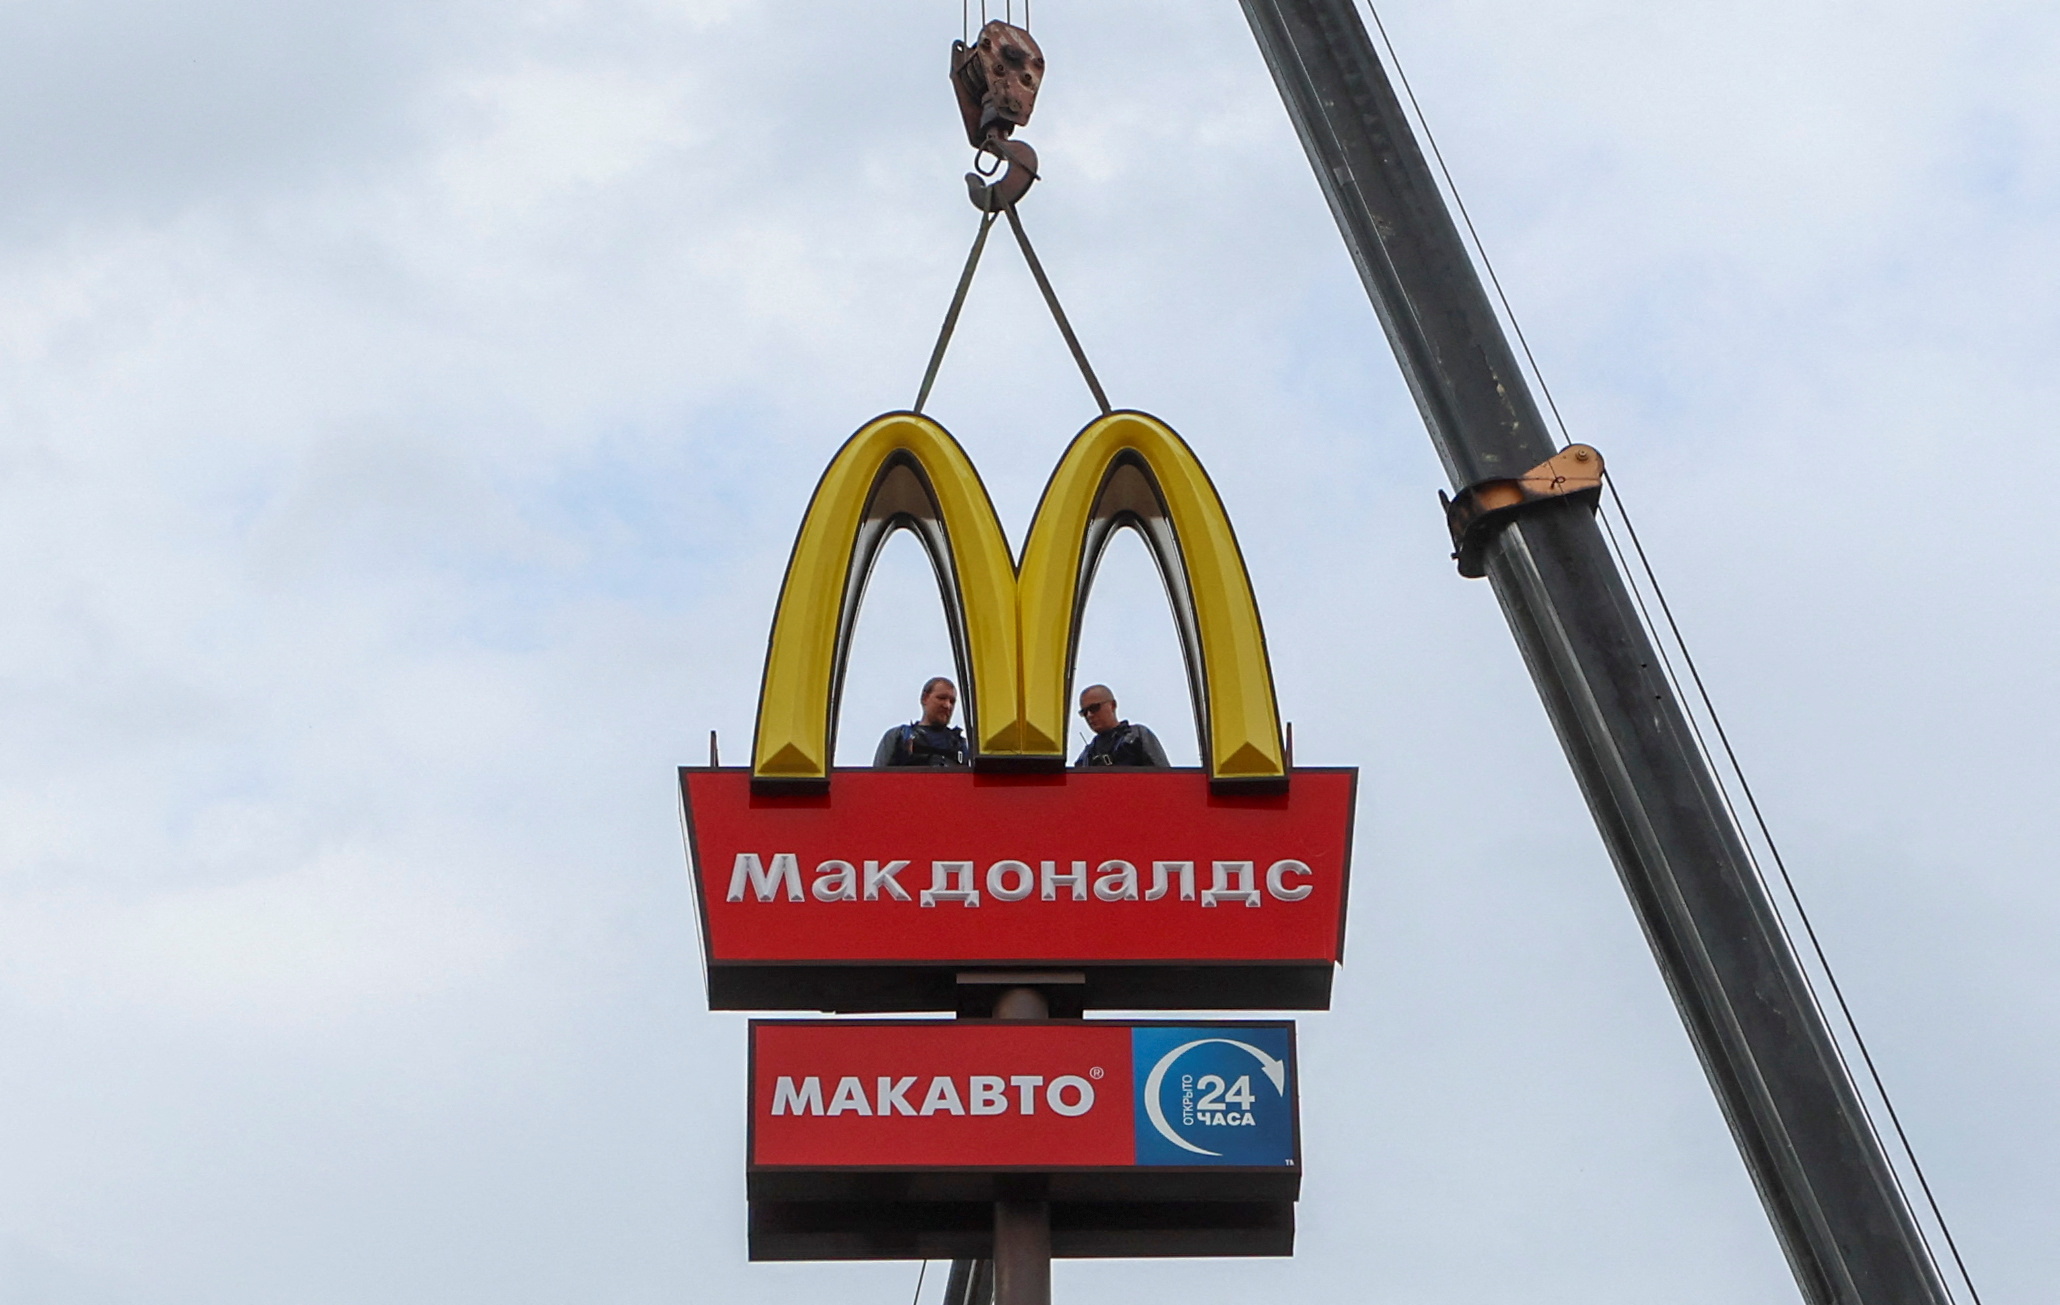 Everything McDonald's Japan Does Ends in Failure, Even This French